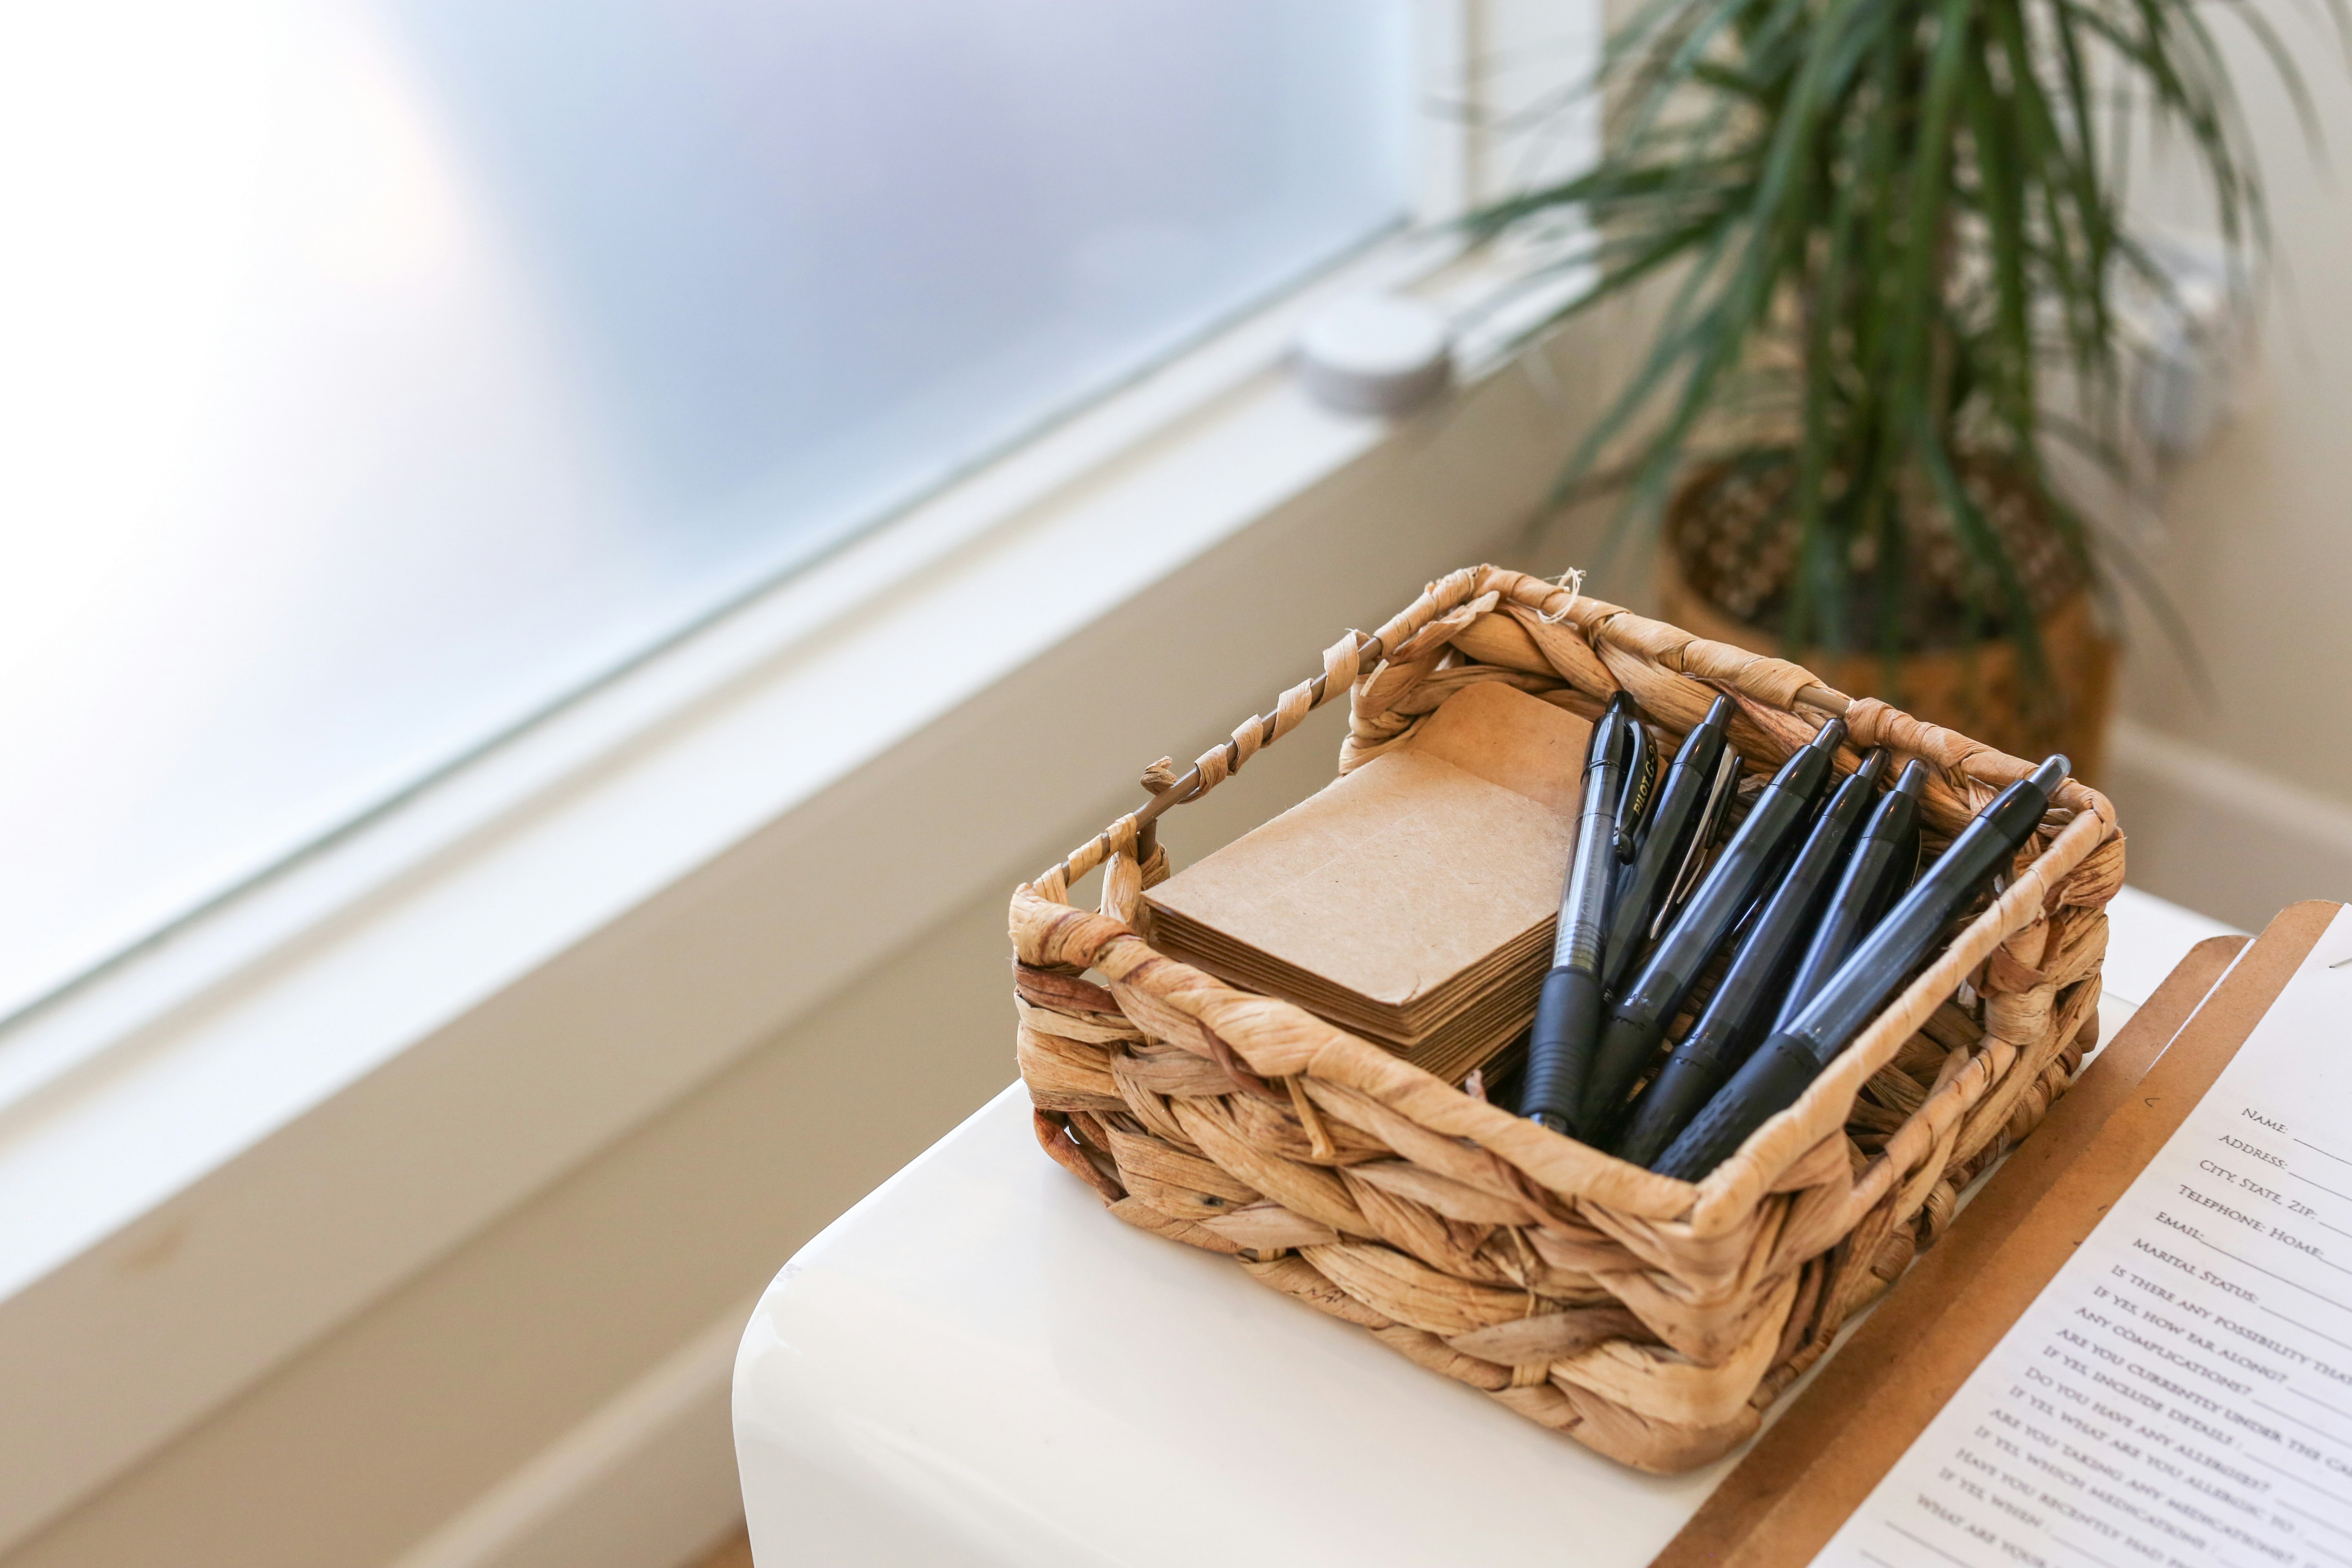 Woven basket with black pens and paper